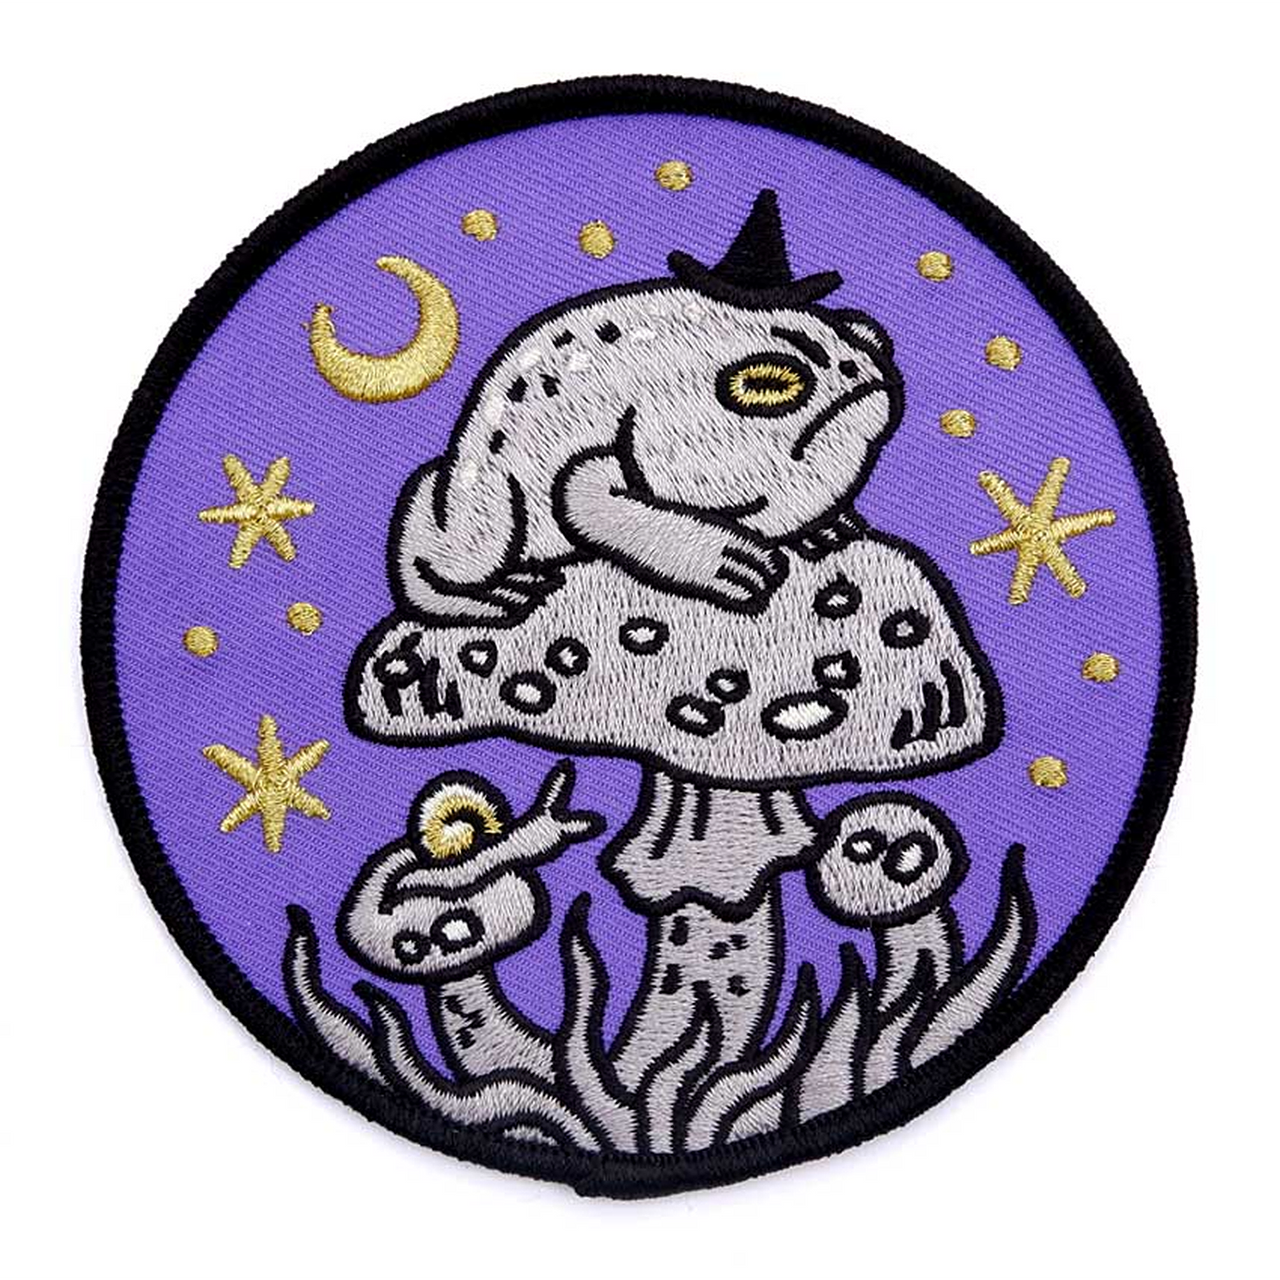 CAT COVEN GRUMPY TOAD WITCH PATCH